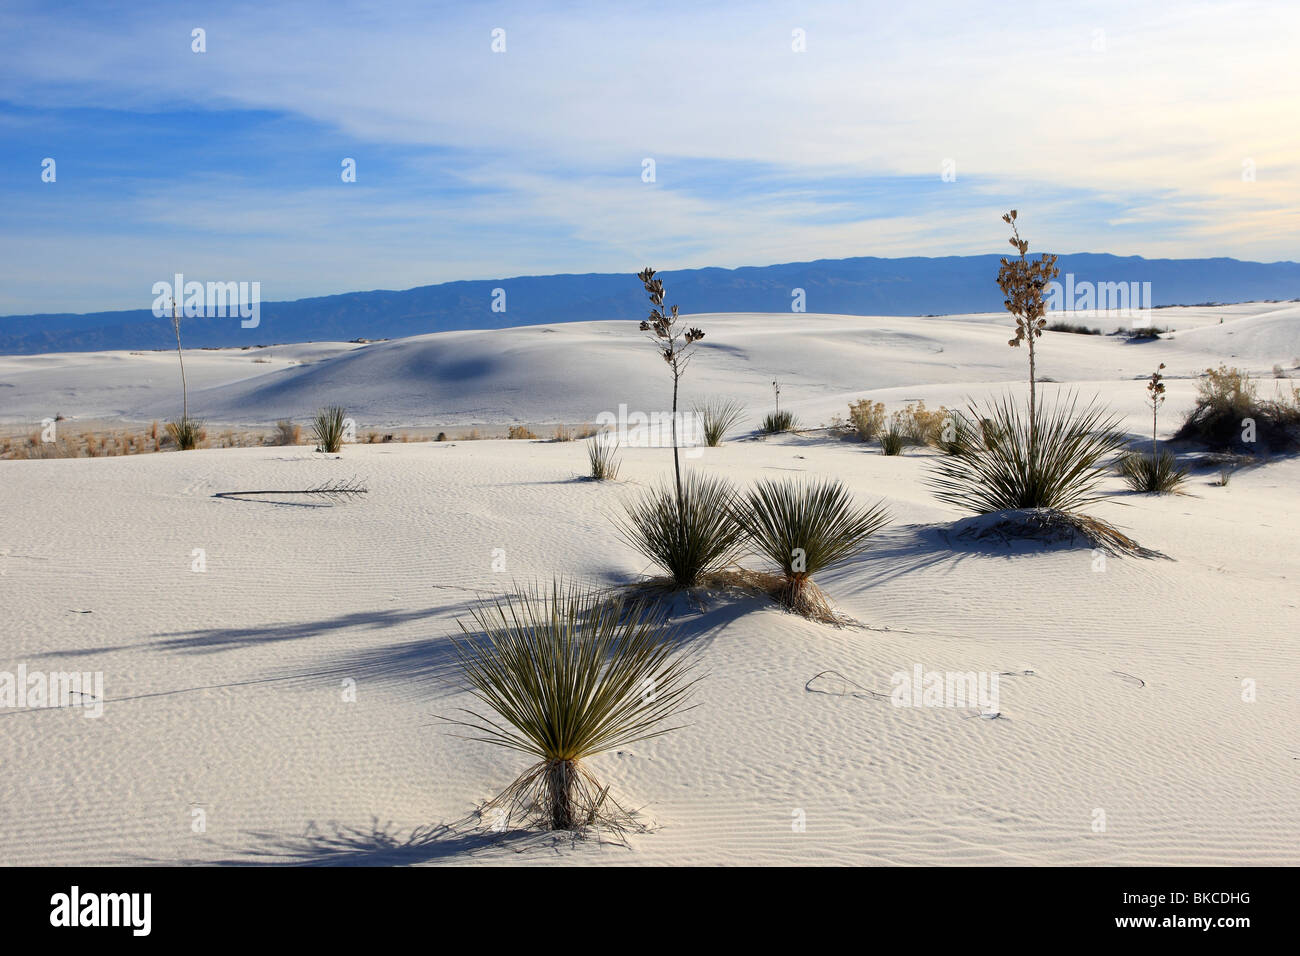 Soaptree Yucca (Yucca elata) . White Sands National Monument, Nuovo Messico. Foto Stock